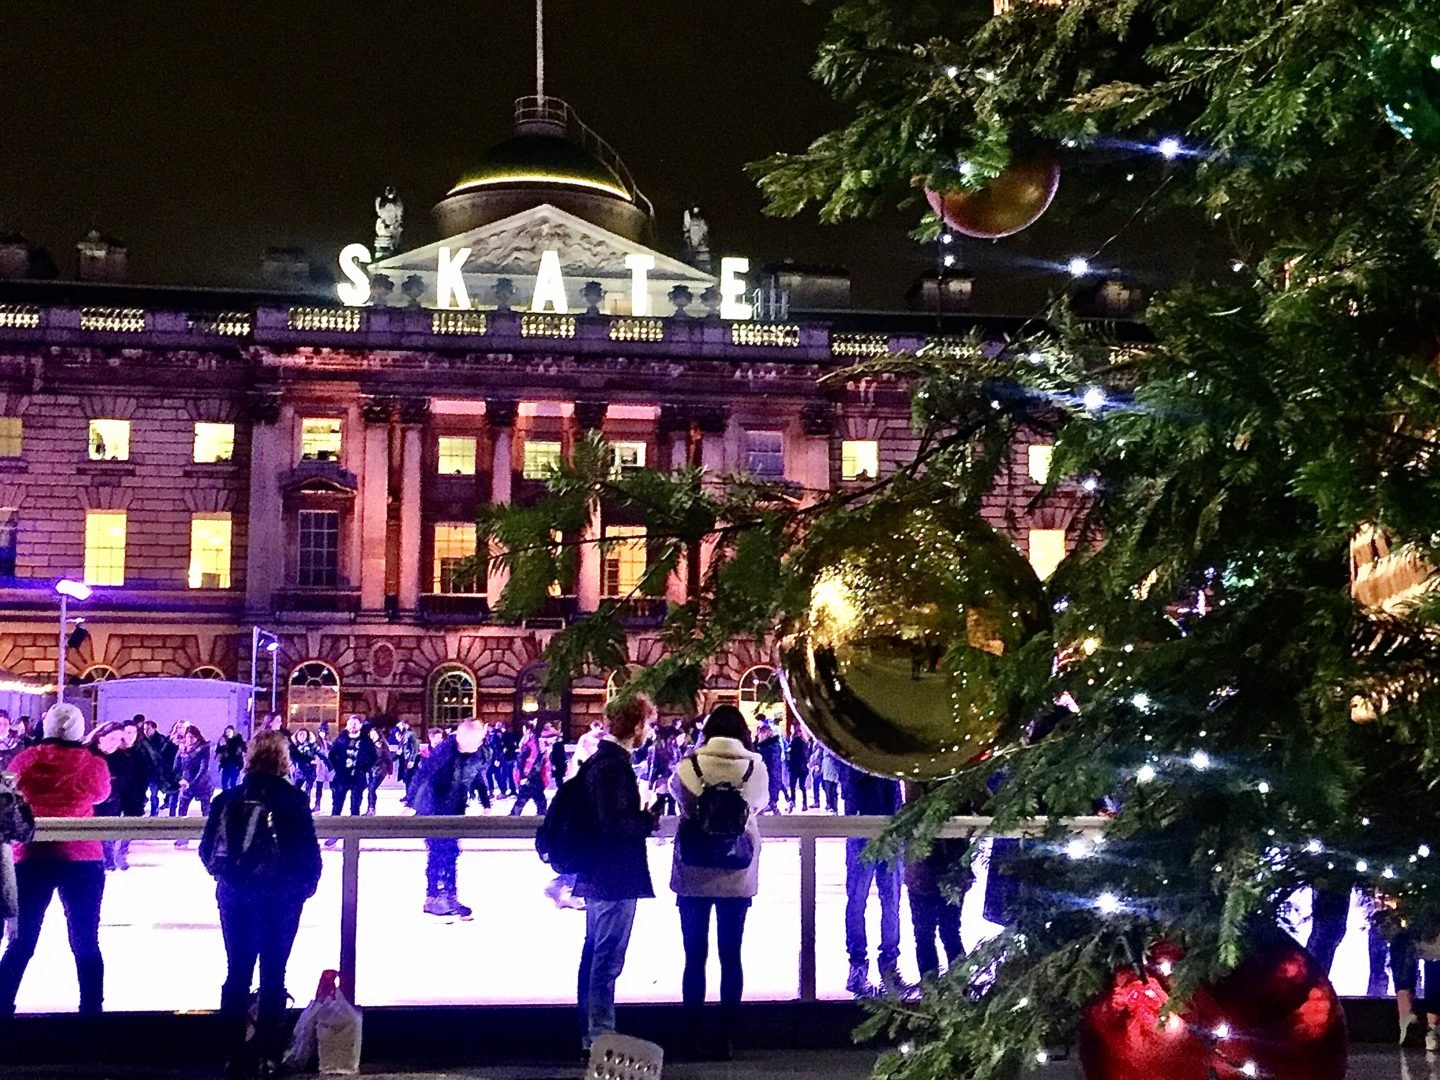 11 Best Ice rinks in London. Skate Ice rink at Somerset house